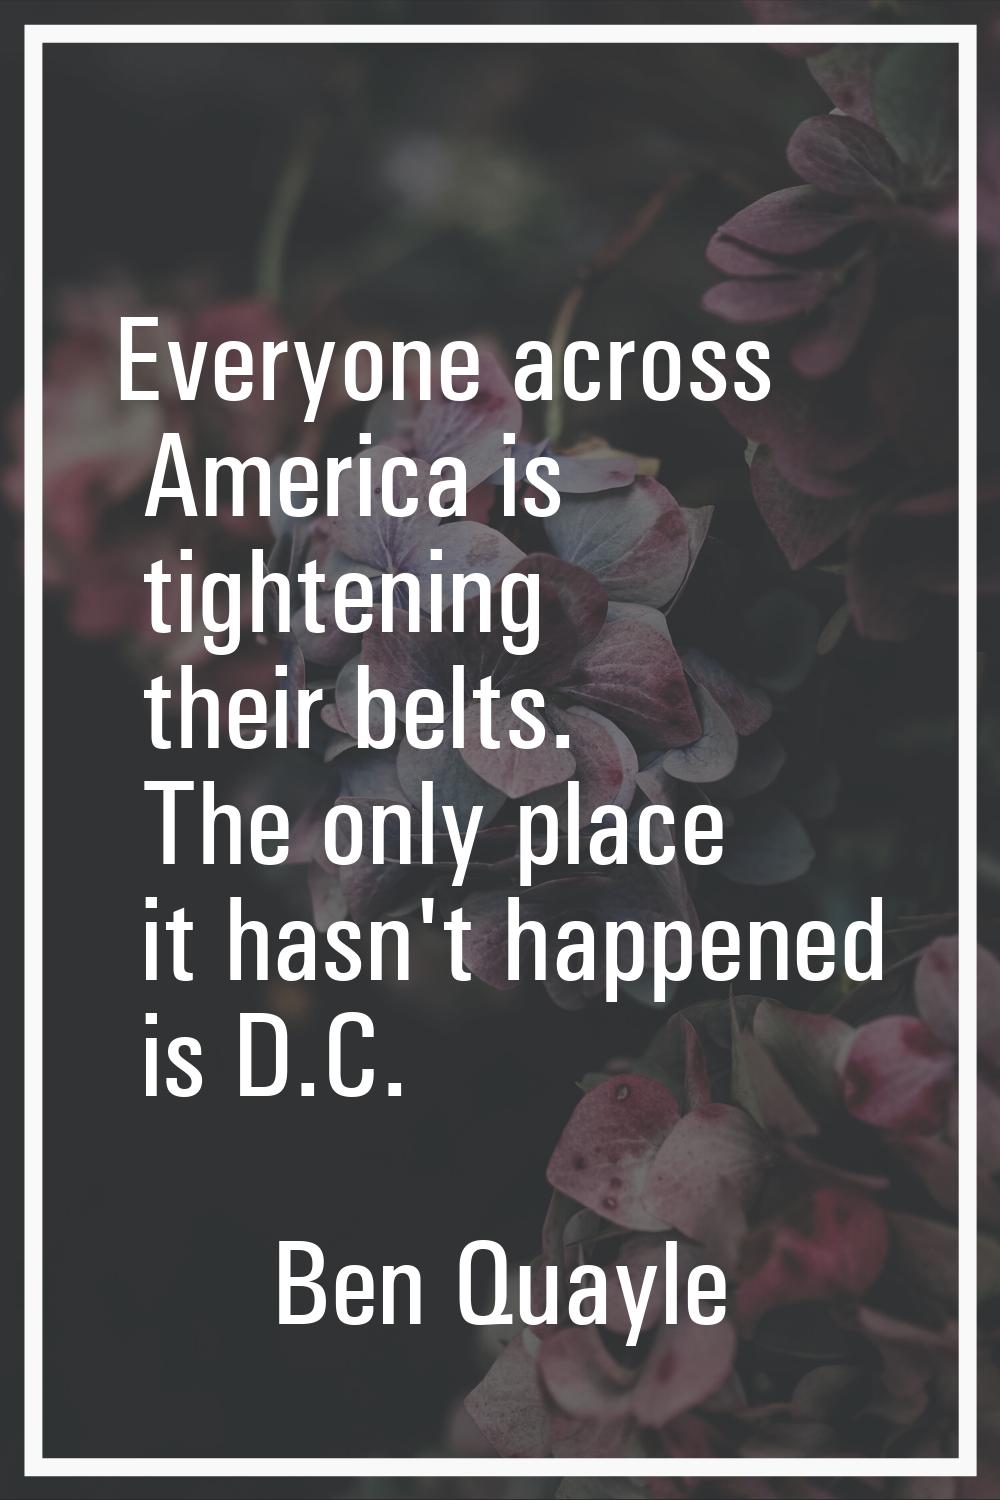 Everyone across America is tightening their belts. The only place it hasn't happened is D.C.